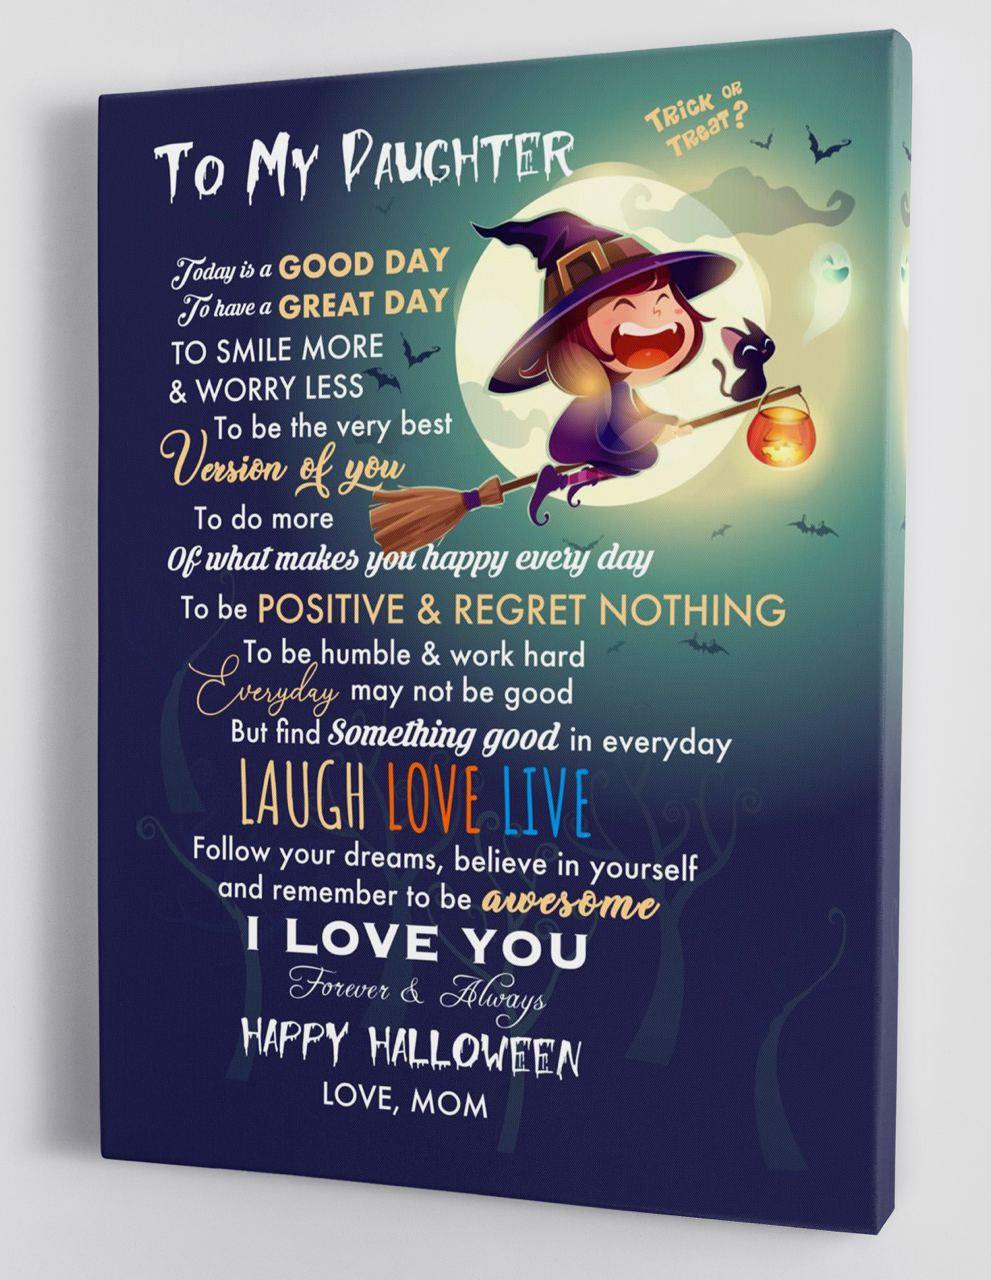 To My Daughter - From Mom - Halloween Canvas Gift MD060 - DivesArt LLC